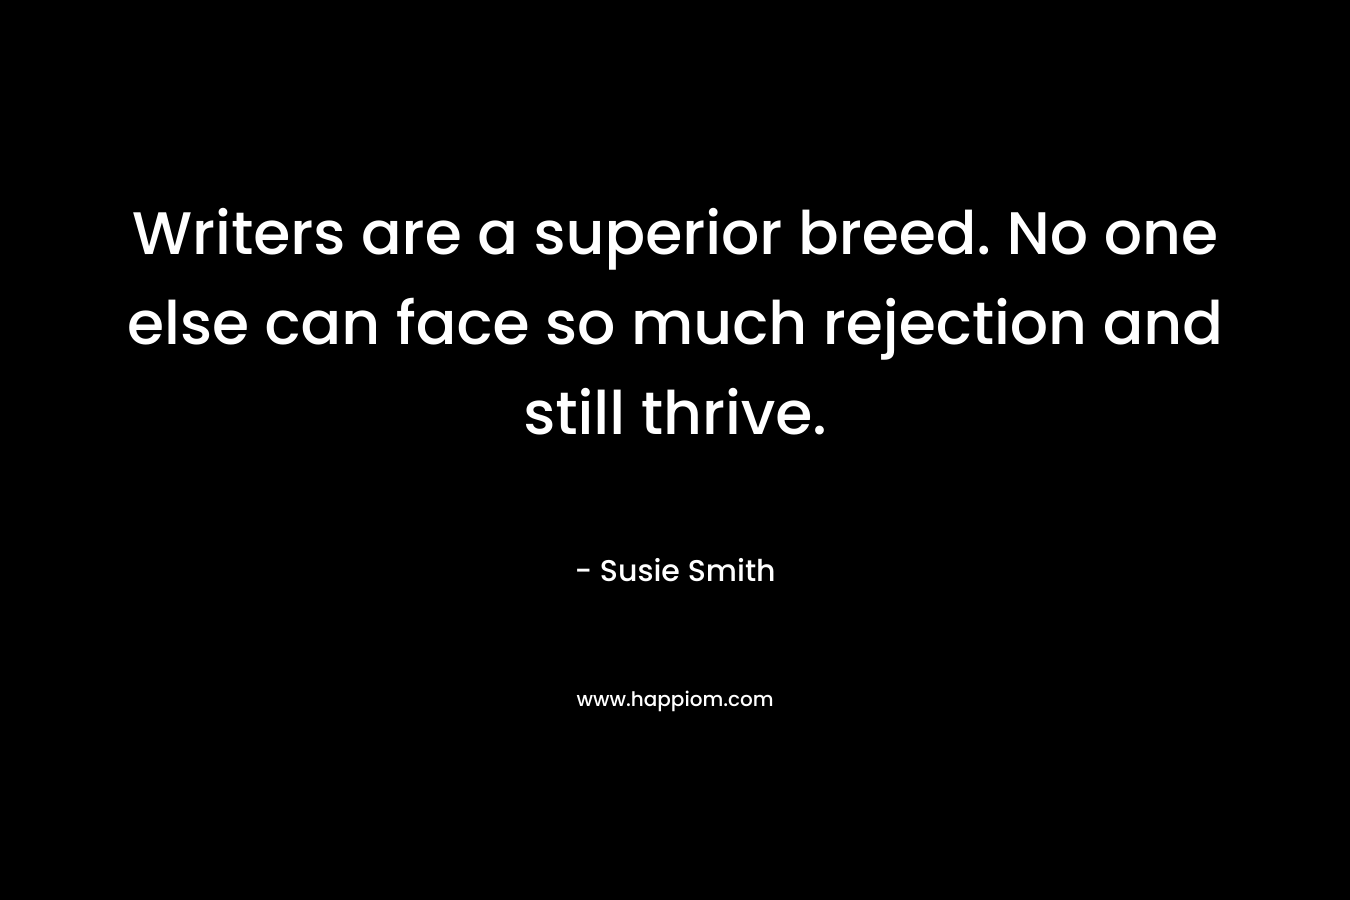 Writers are a superior breed. No one else can face so much rejection and still thrive. – Susie Smith